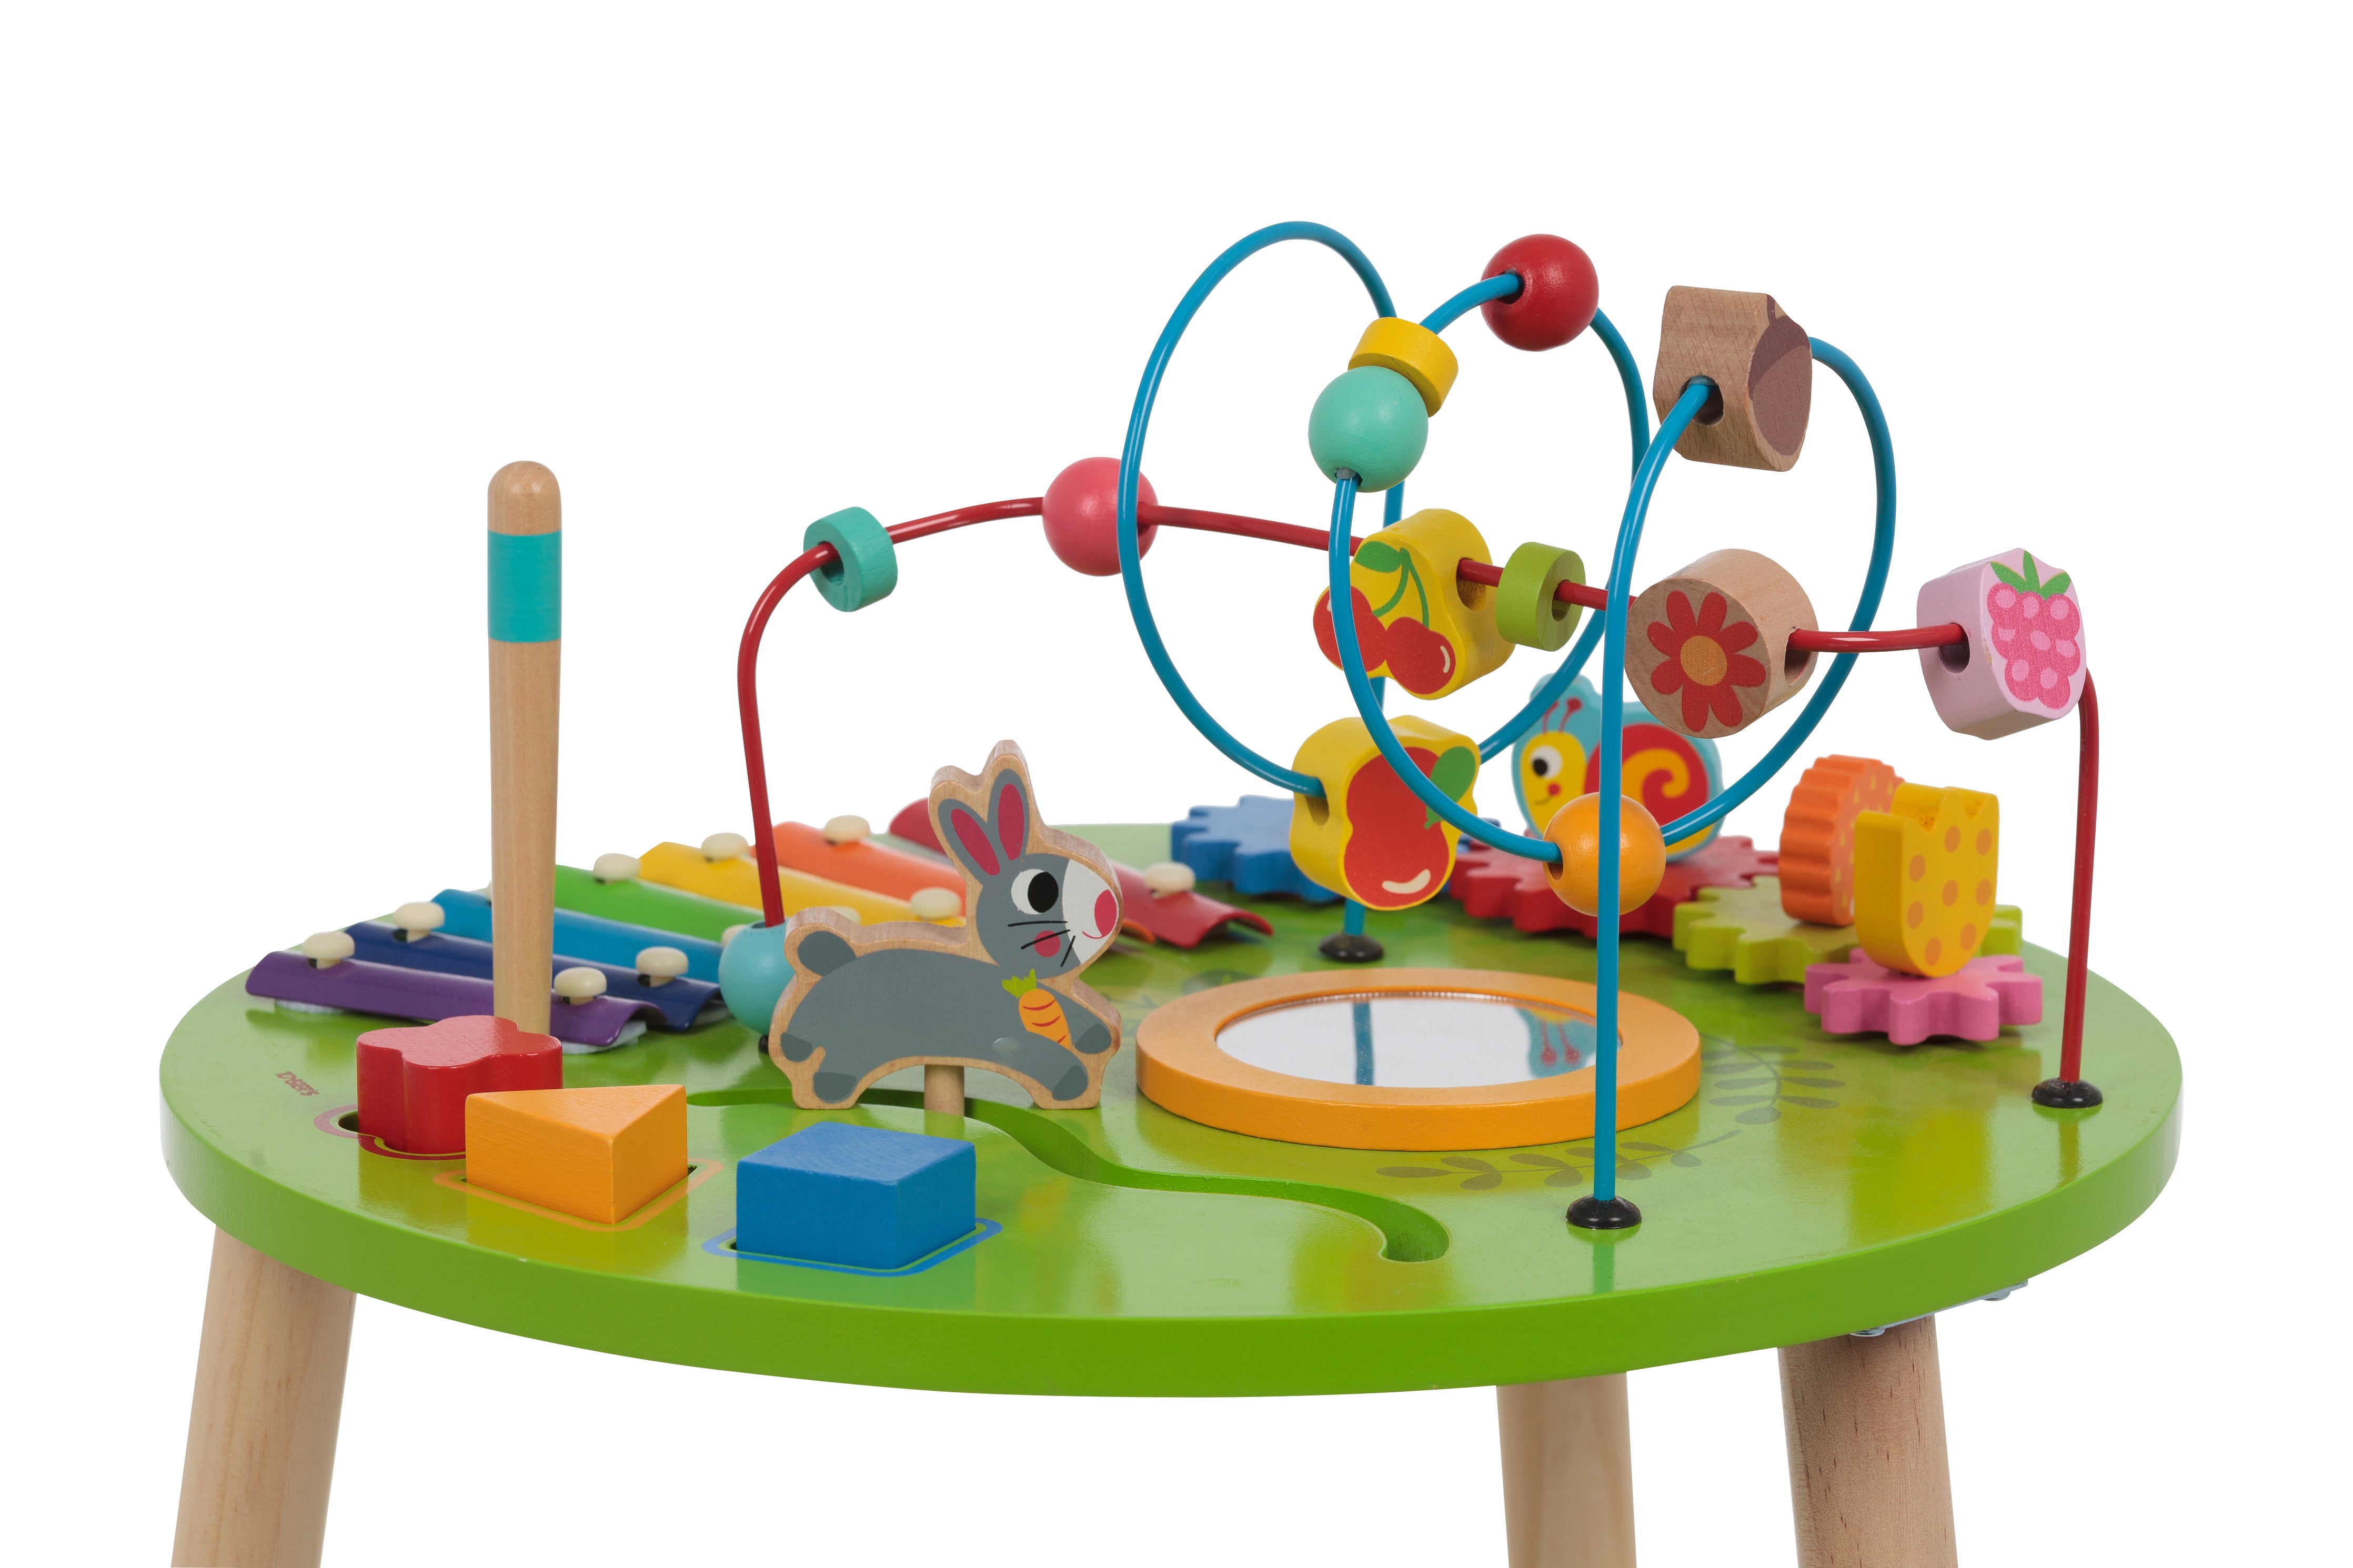 Toyster’s Wooden Activity Table for Toddlers